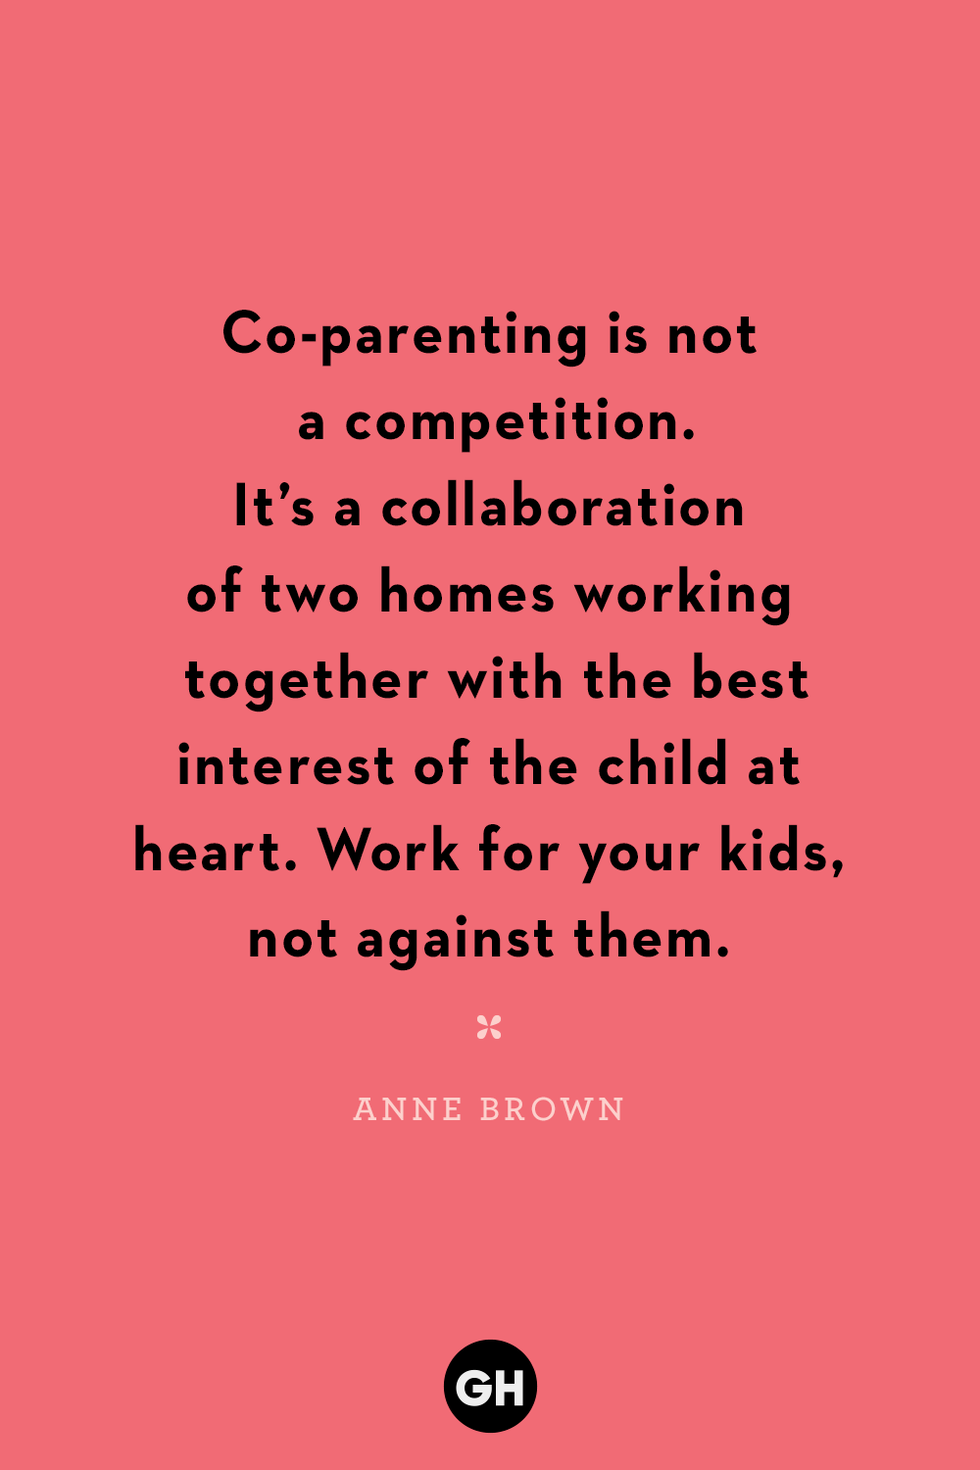 stepmom quote by anne brown